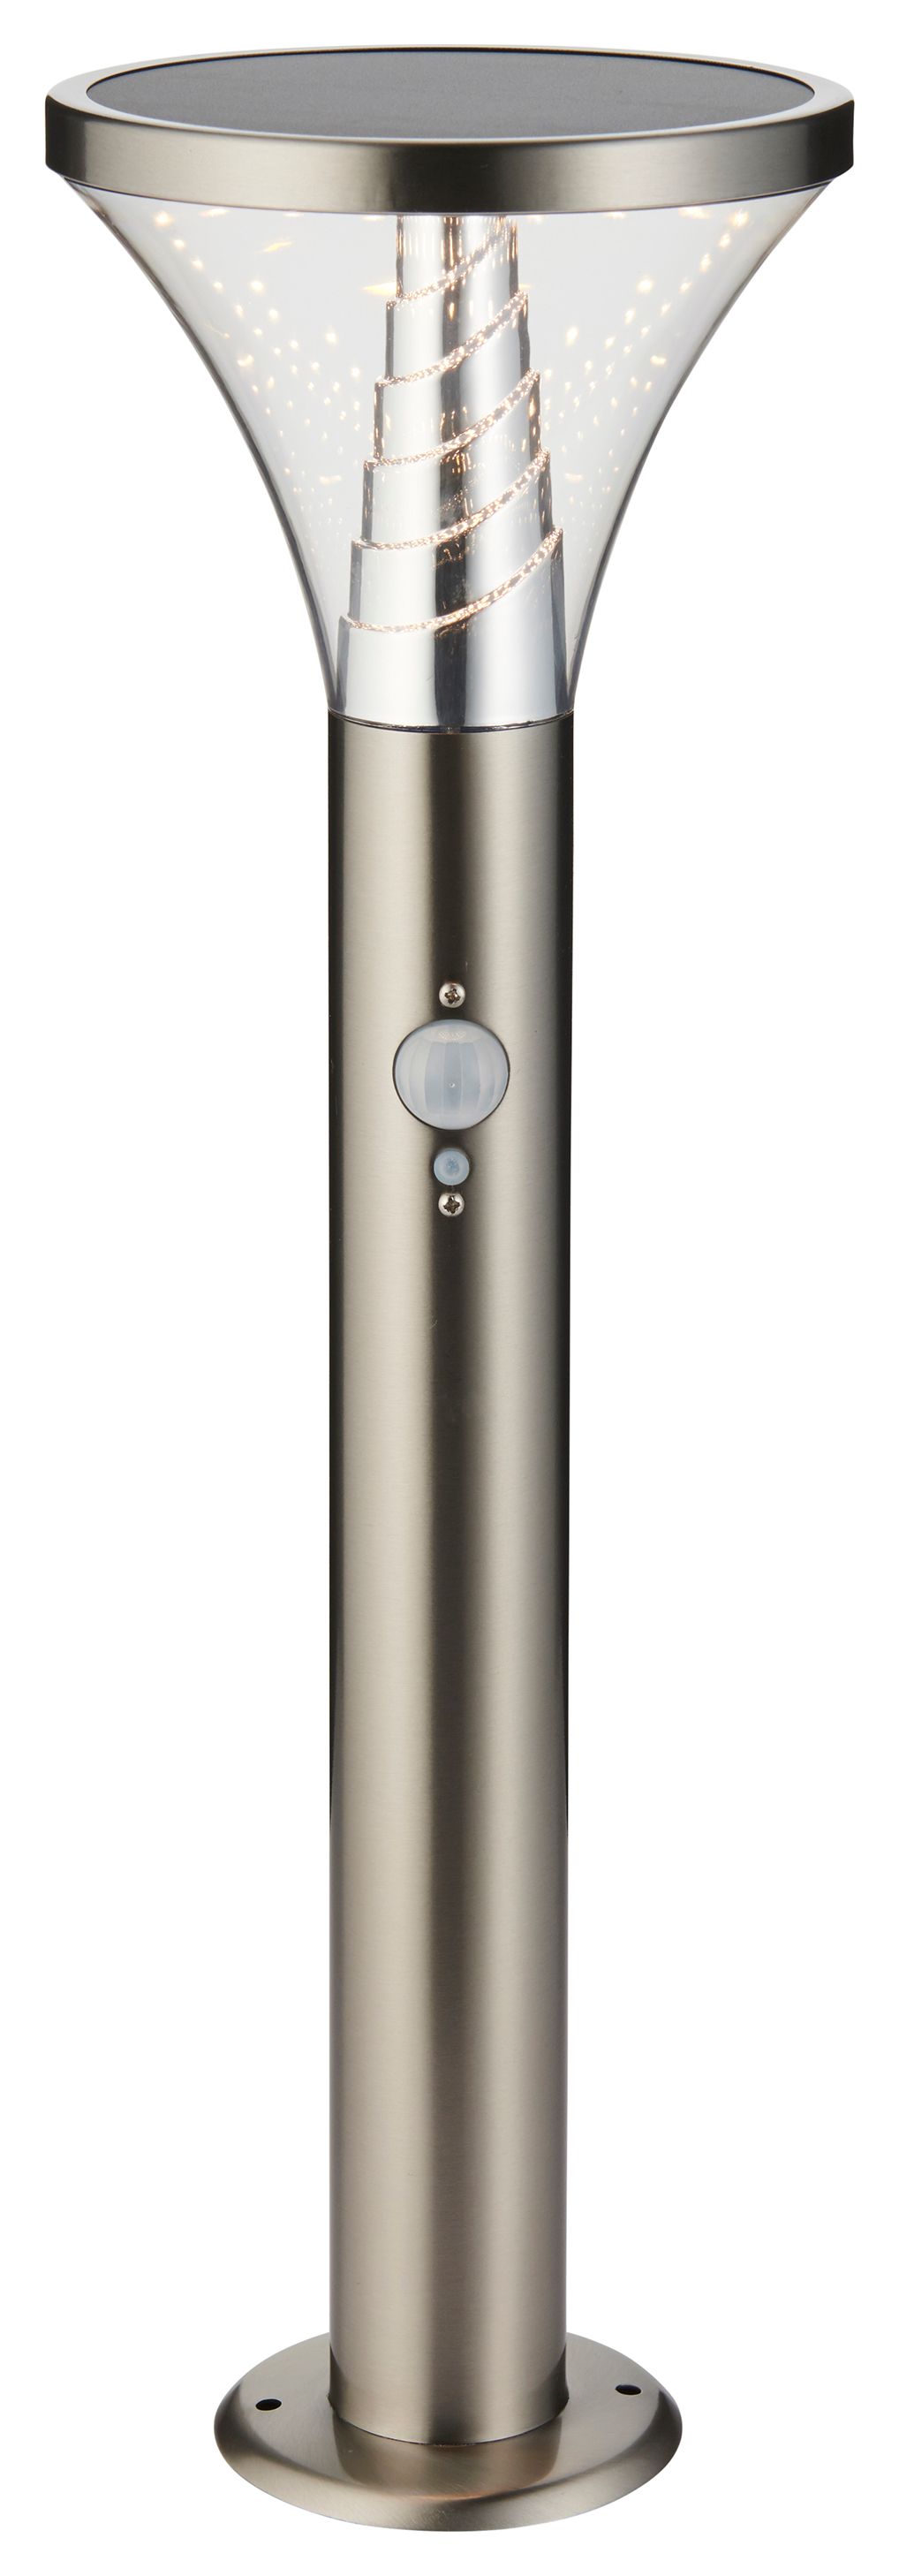 Image of Saxby Toko Outdoor Solar Post Light - Brushed Stainless Steel